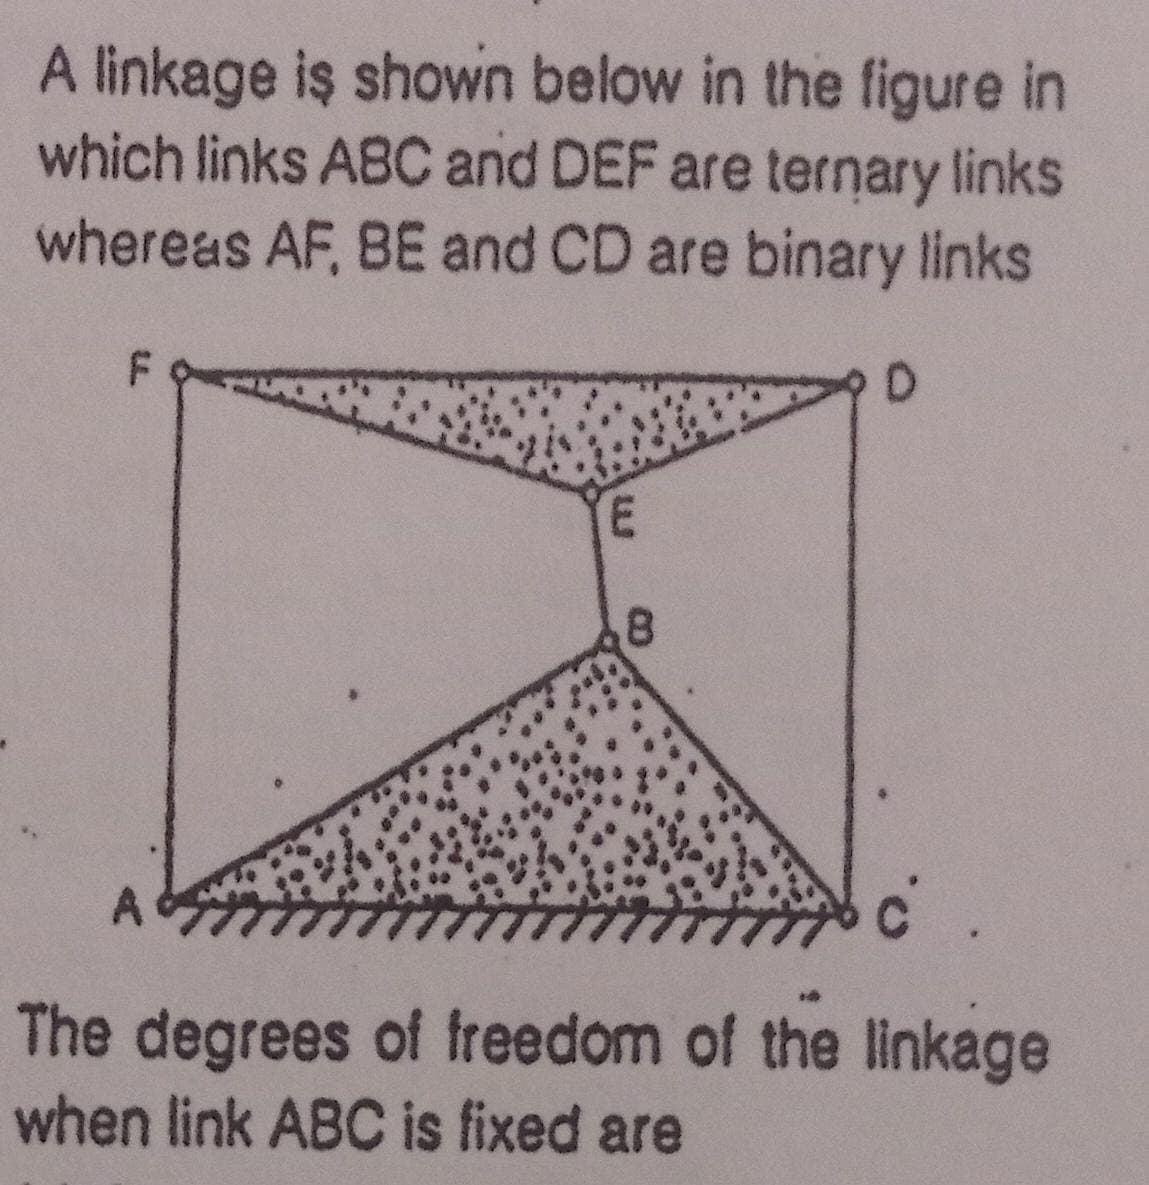 A linkage iş shown below in the figure in
which links ABC and DEF are ternary links
whereas AF, BE and CD are binary links
A.
The degrees of freedom of the linkage
when link ABC is fixed are
